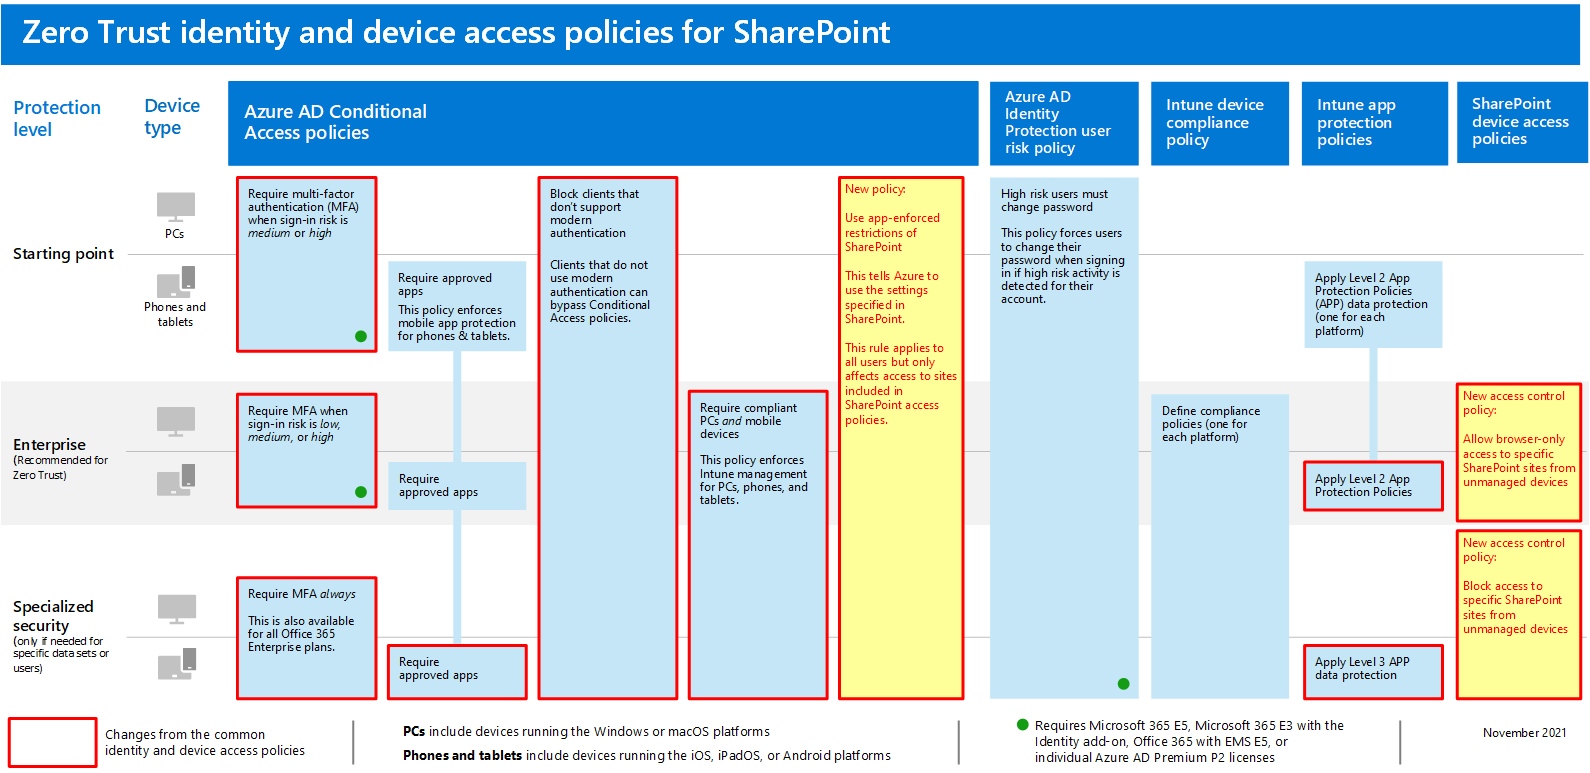 The summary of policy updates for protecting the access to SharePoint